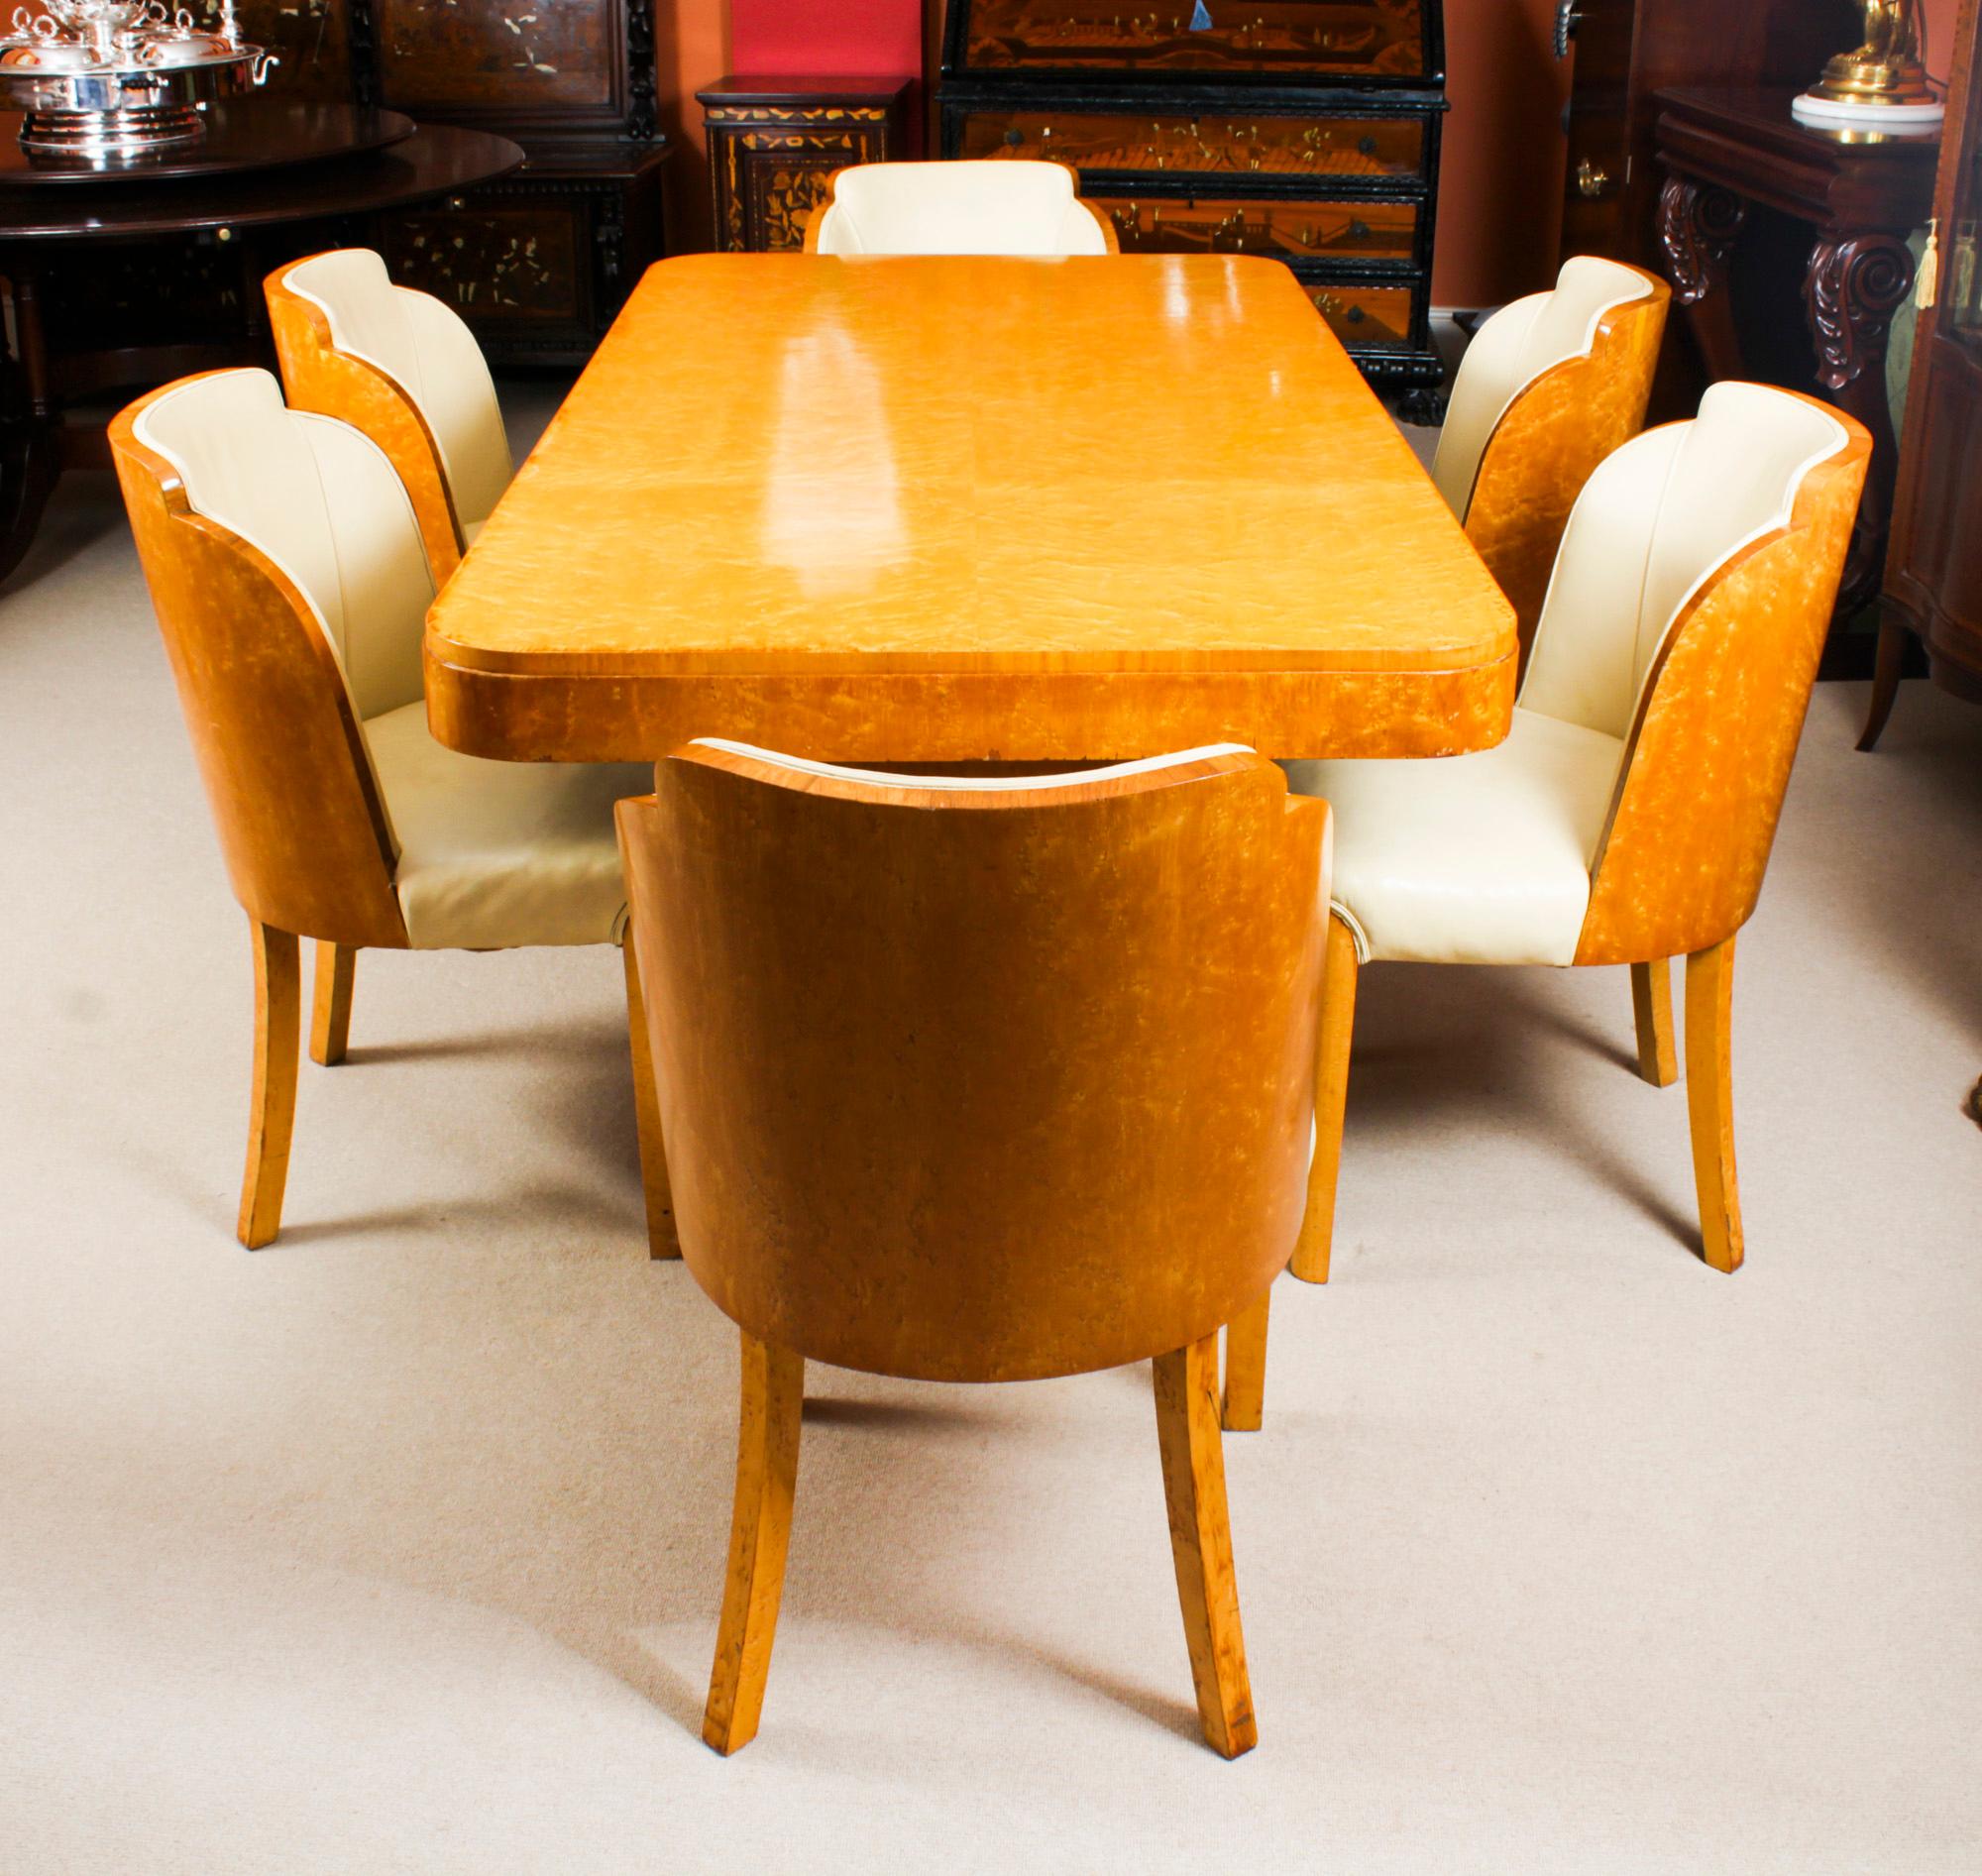 A truly stunning antique Art Deco birds-eye maple dining suite attributed to the world renowned cabinet makers, Harry & Lou Epstein, comprising a dining table and the original matching set of six cloud back dining chairs, circa 1920 in date.

The